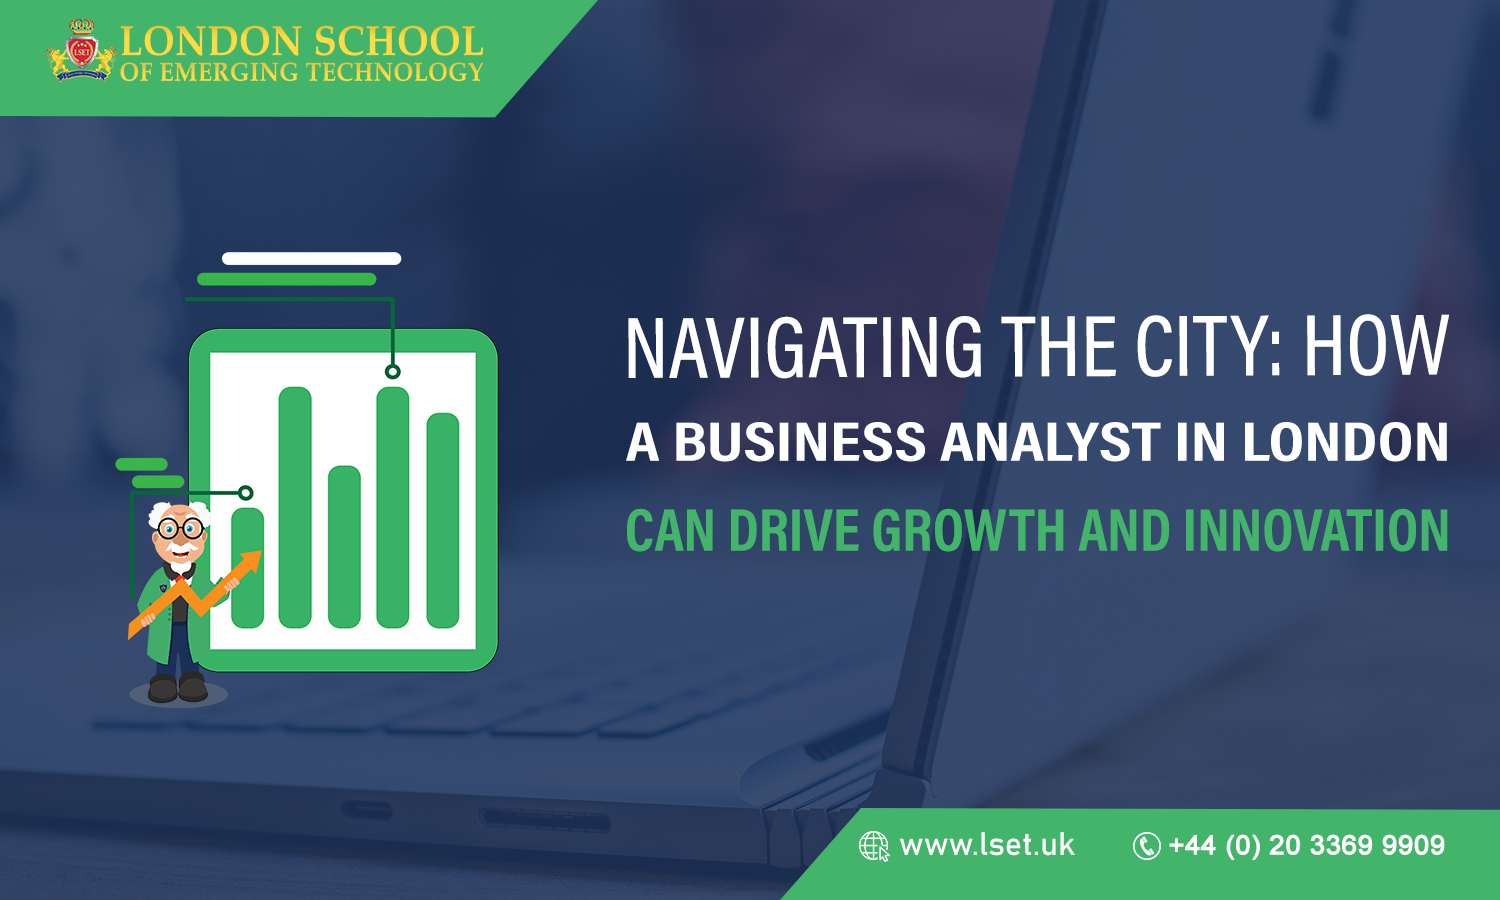 Navigating the City How a Business Analyst in London Can Drive Growth and Innovation